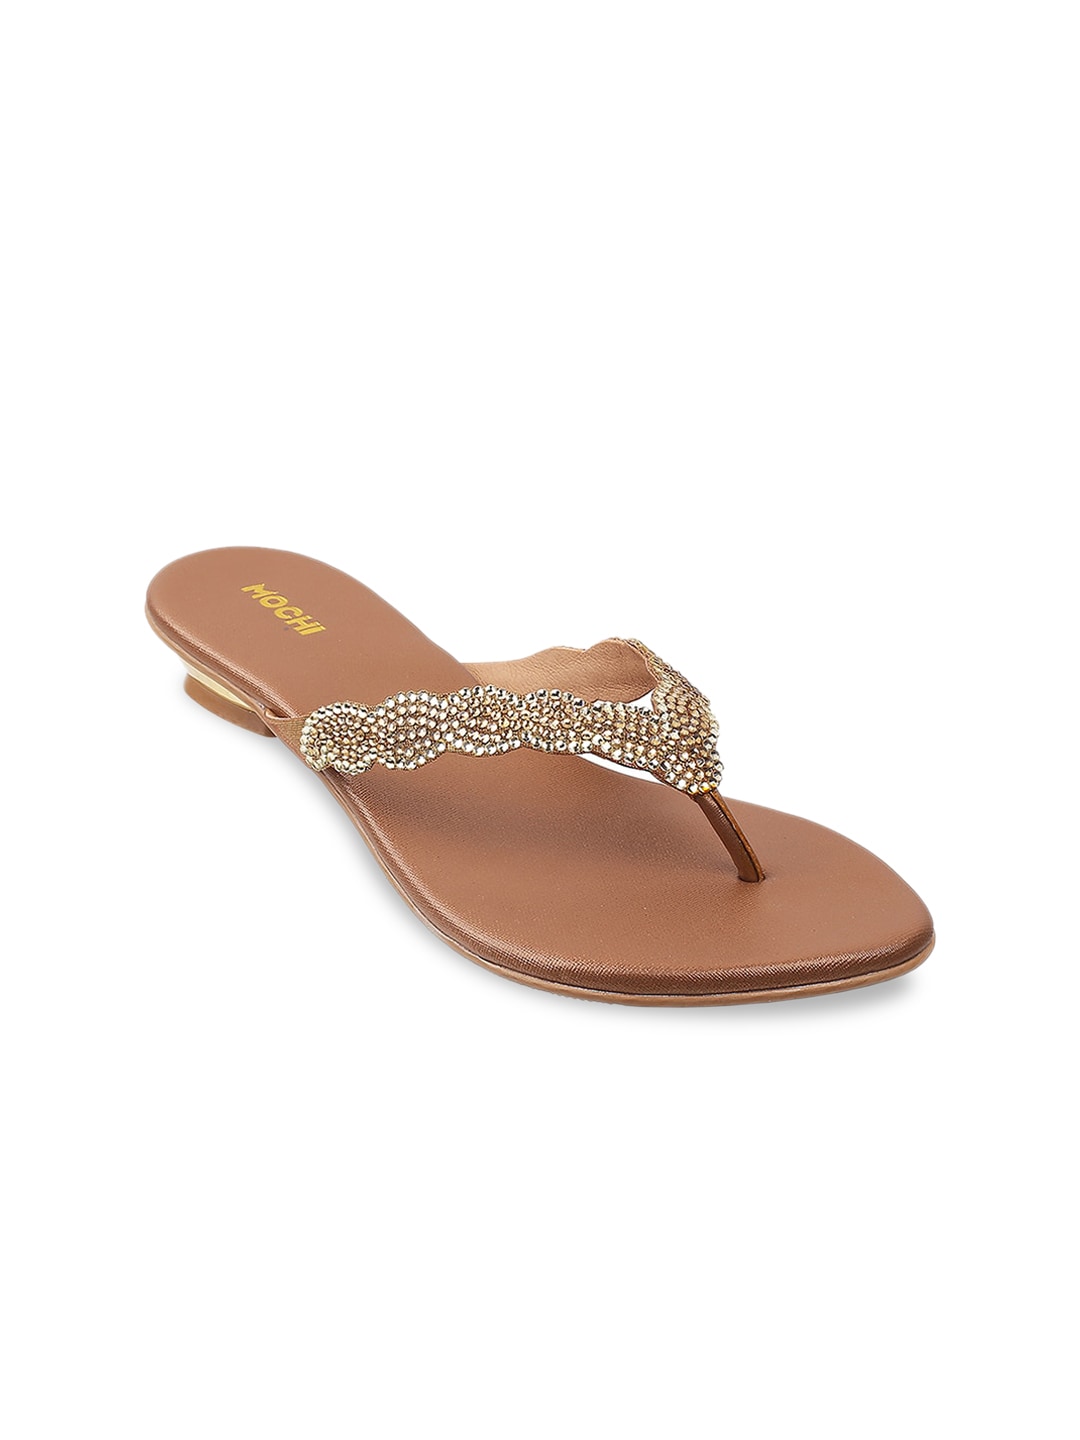 Mochi Gold-Toned Embellished Wedge Sandals Price in India